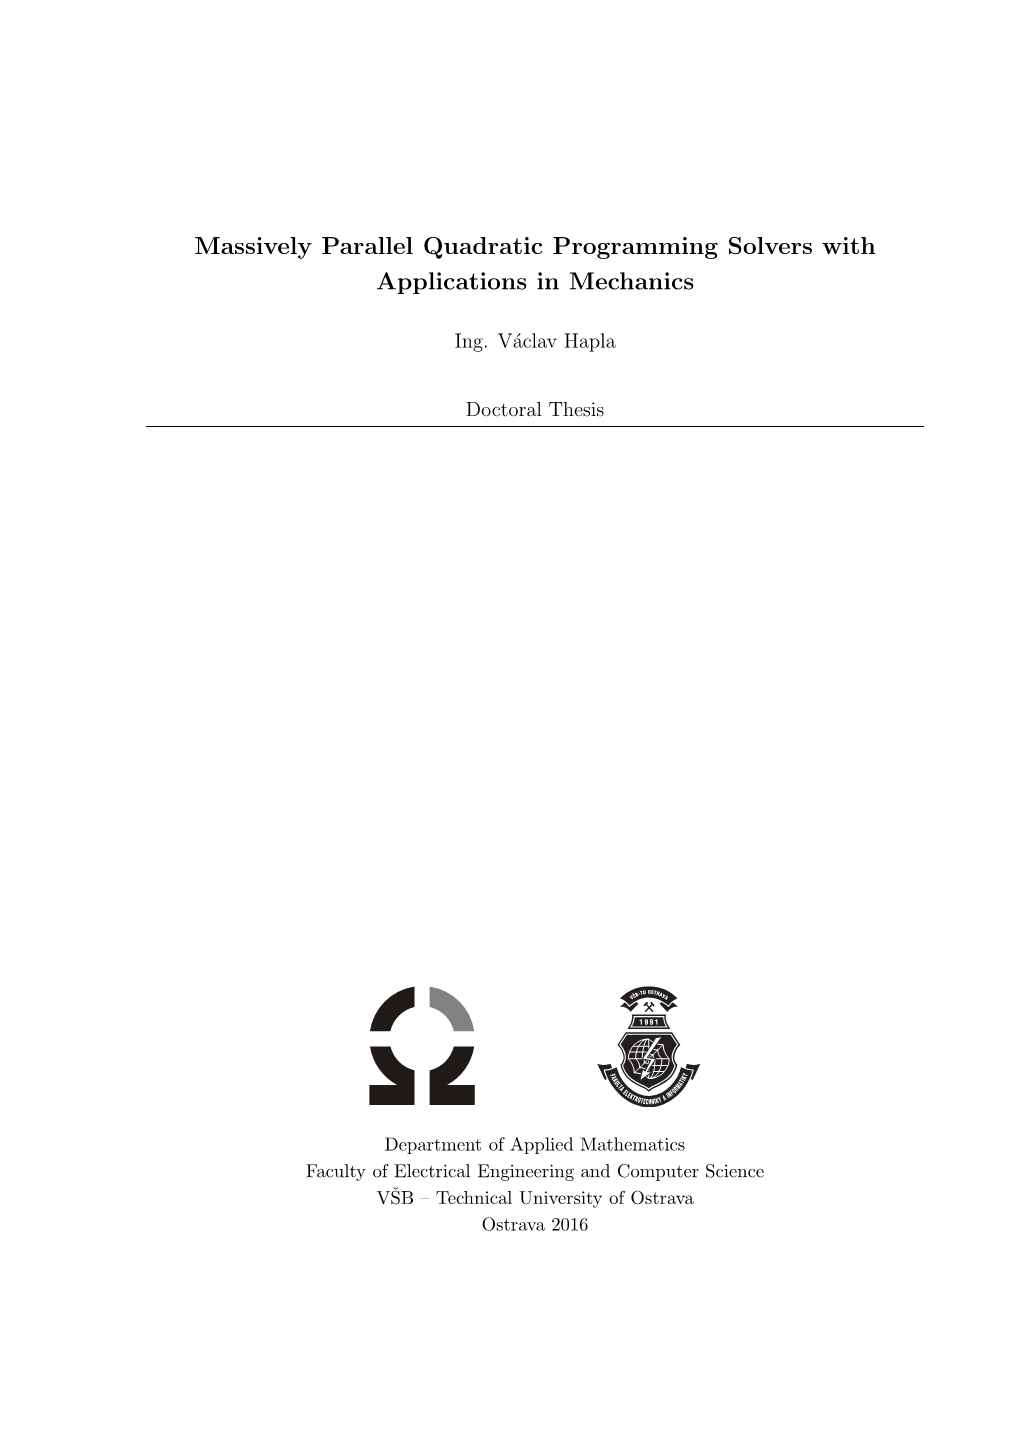 Massively Parallel Quadratic Programming Solvers with Applications in Mechanics